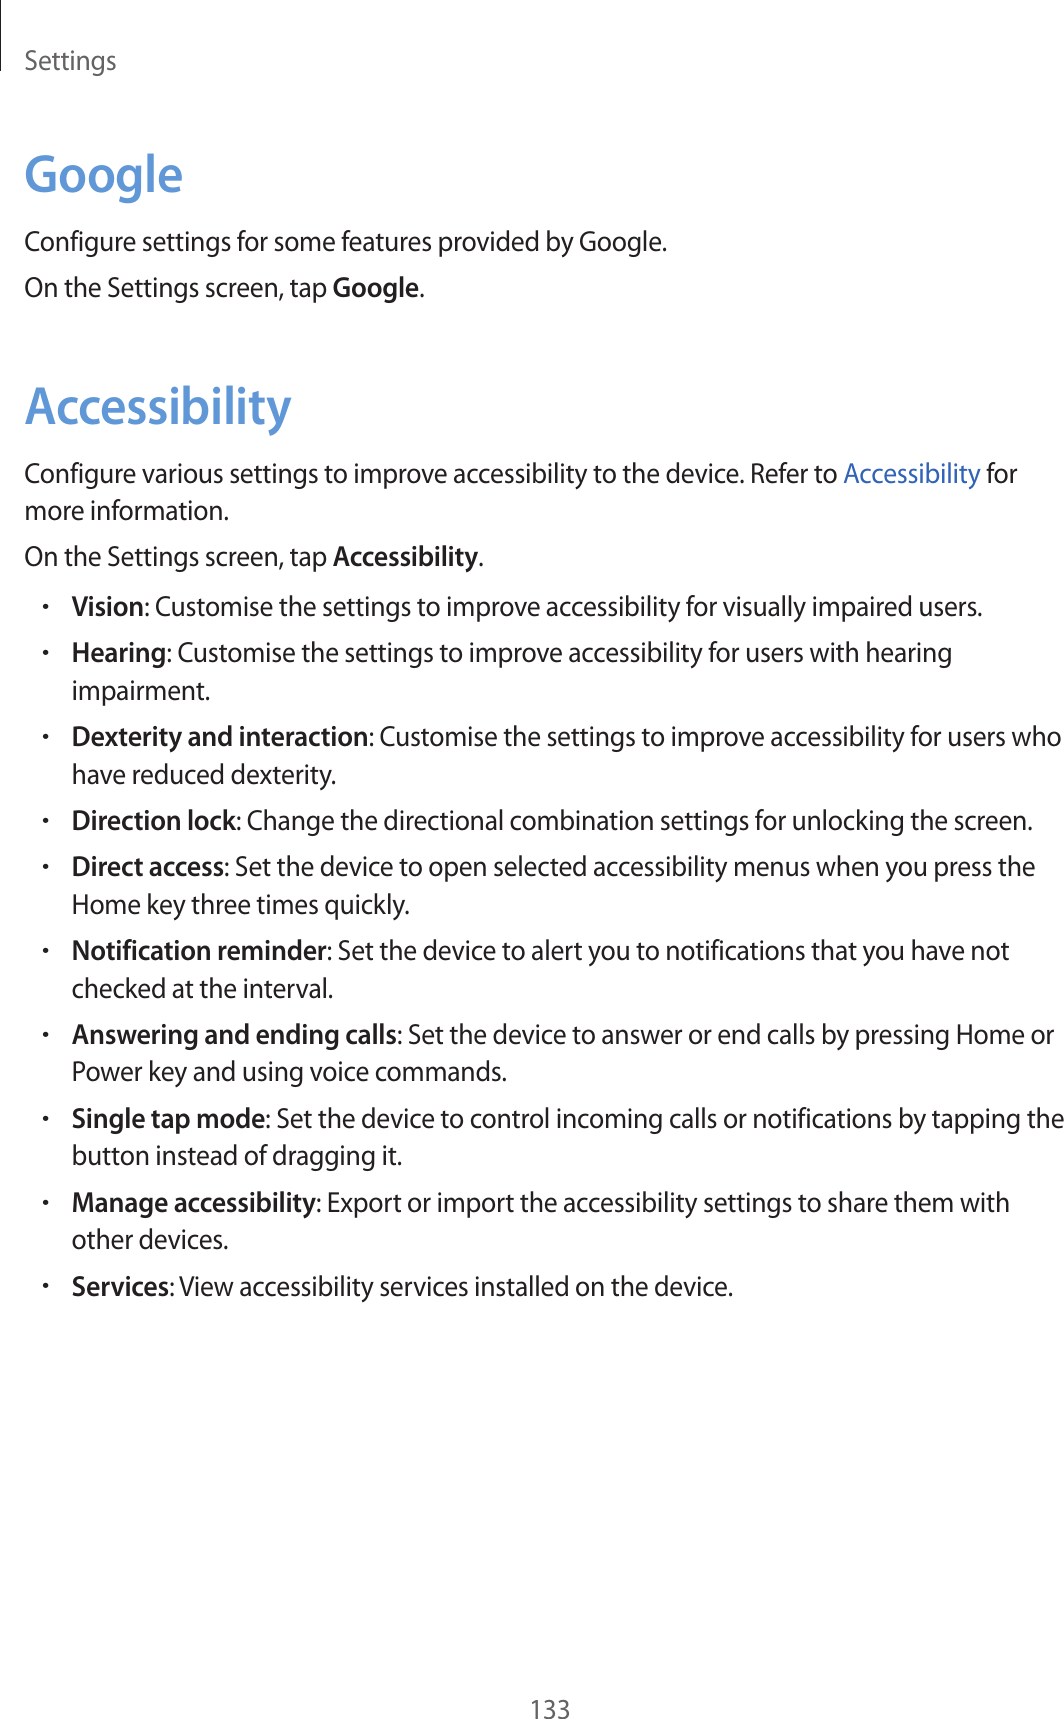 Settings133GoogleConfigure settings for some features provided by Google.On the Settings screen, tap Google.AccessibilityConfigure various settings to improve accessibility to the device. Refer to Accessibility for more information.On the Settings screen, tap Accessibility.•Vision: Customise the settings to improve accessibility for visually impaired users.•Hearing: Customise the settings to improve accessibility for users with hearing impairment.•Dexterity and interaction: Customise the settings to improve accessibility for users who have reduced dexterity.•Direction lock: Change the directional combination settings for unlocking the screen.•Direct access: Set the device to open selected accessibility menus when you press the Home key three times quickly.•Notification reminder: Set the device to alert you to notifications that you have not checked at the interval.•Answering and ending calls: Set the device to answer or end calls by pressing Home or Power key and using voice commands.•Single tap mode: Set the device to control incoming calls or notifications by tapping the button instead of dragging it.•Manage accessibility: Export or import the accessibility settings to share them with other devices.•Services: View accessibility services installed on the device.